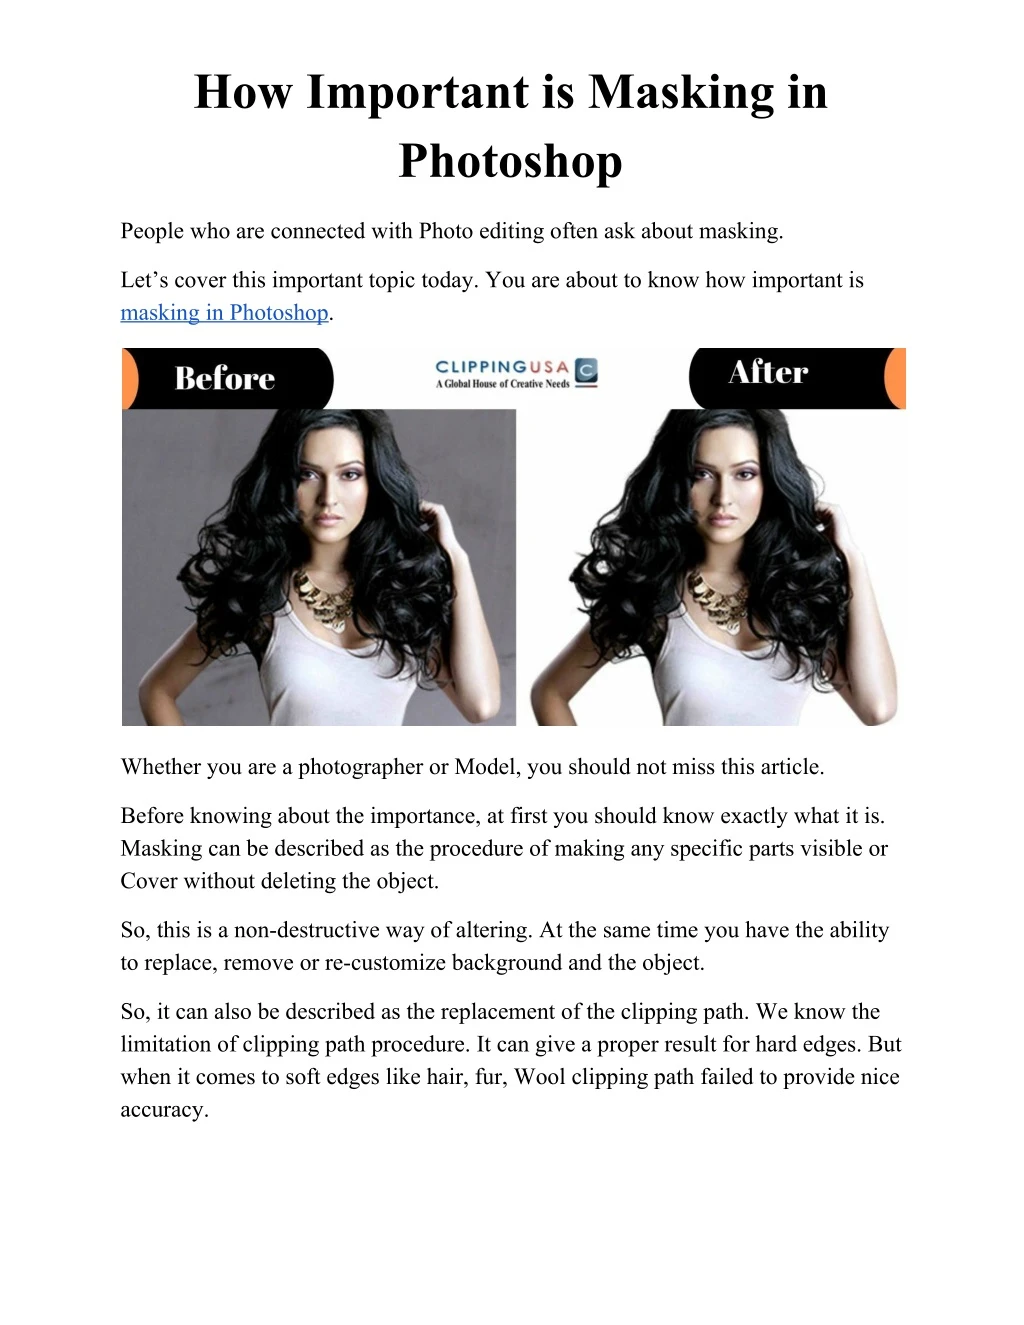 how important is masking in photoshop